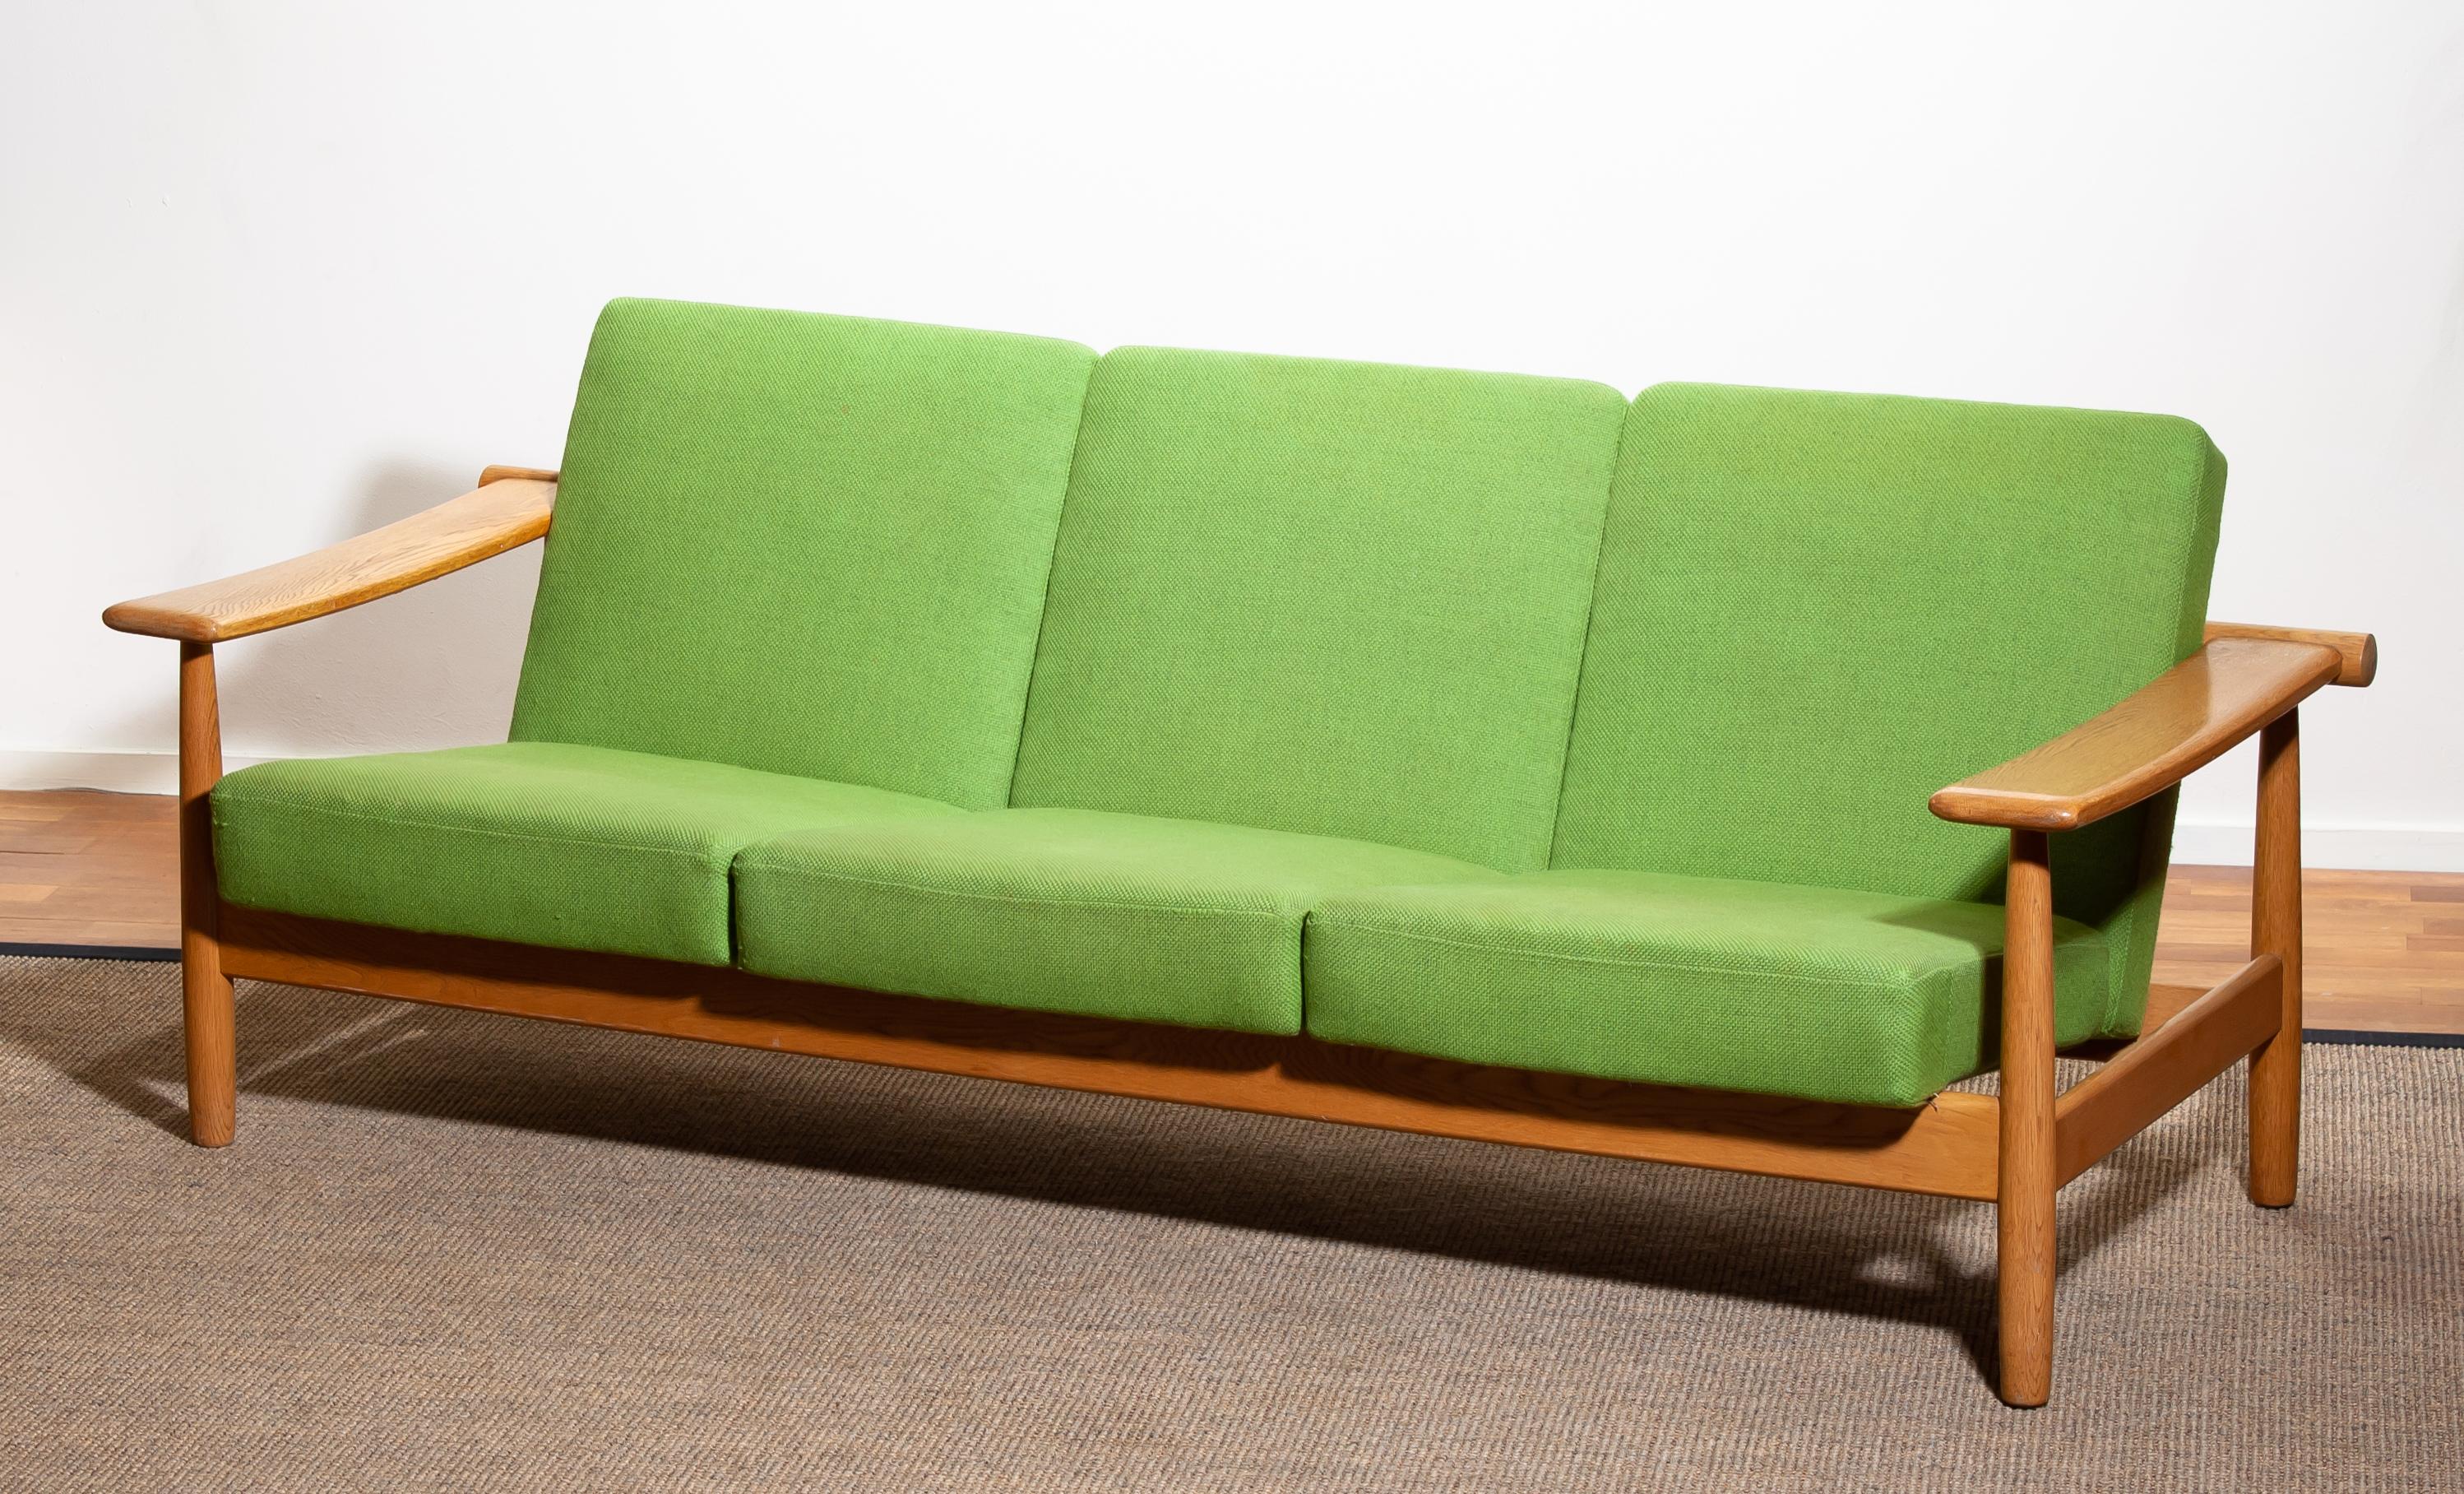 1960s, Oak Sofa and Lounge Chair or Living Room Set from Denmark 8